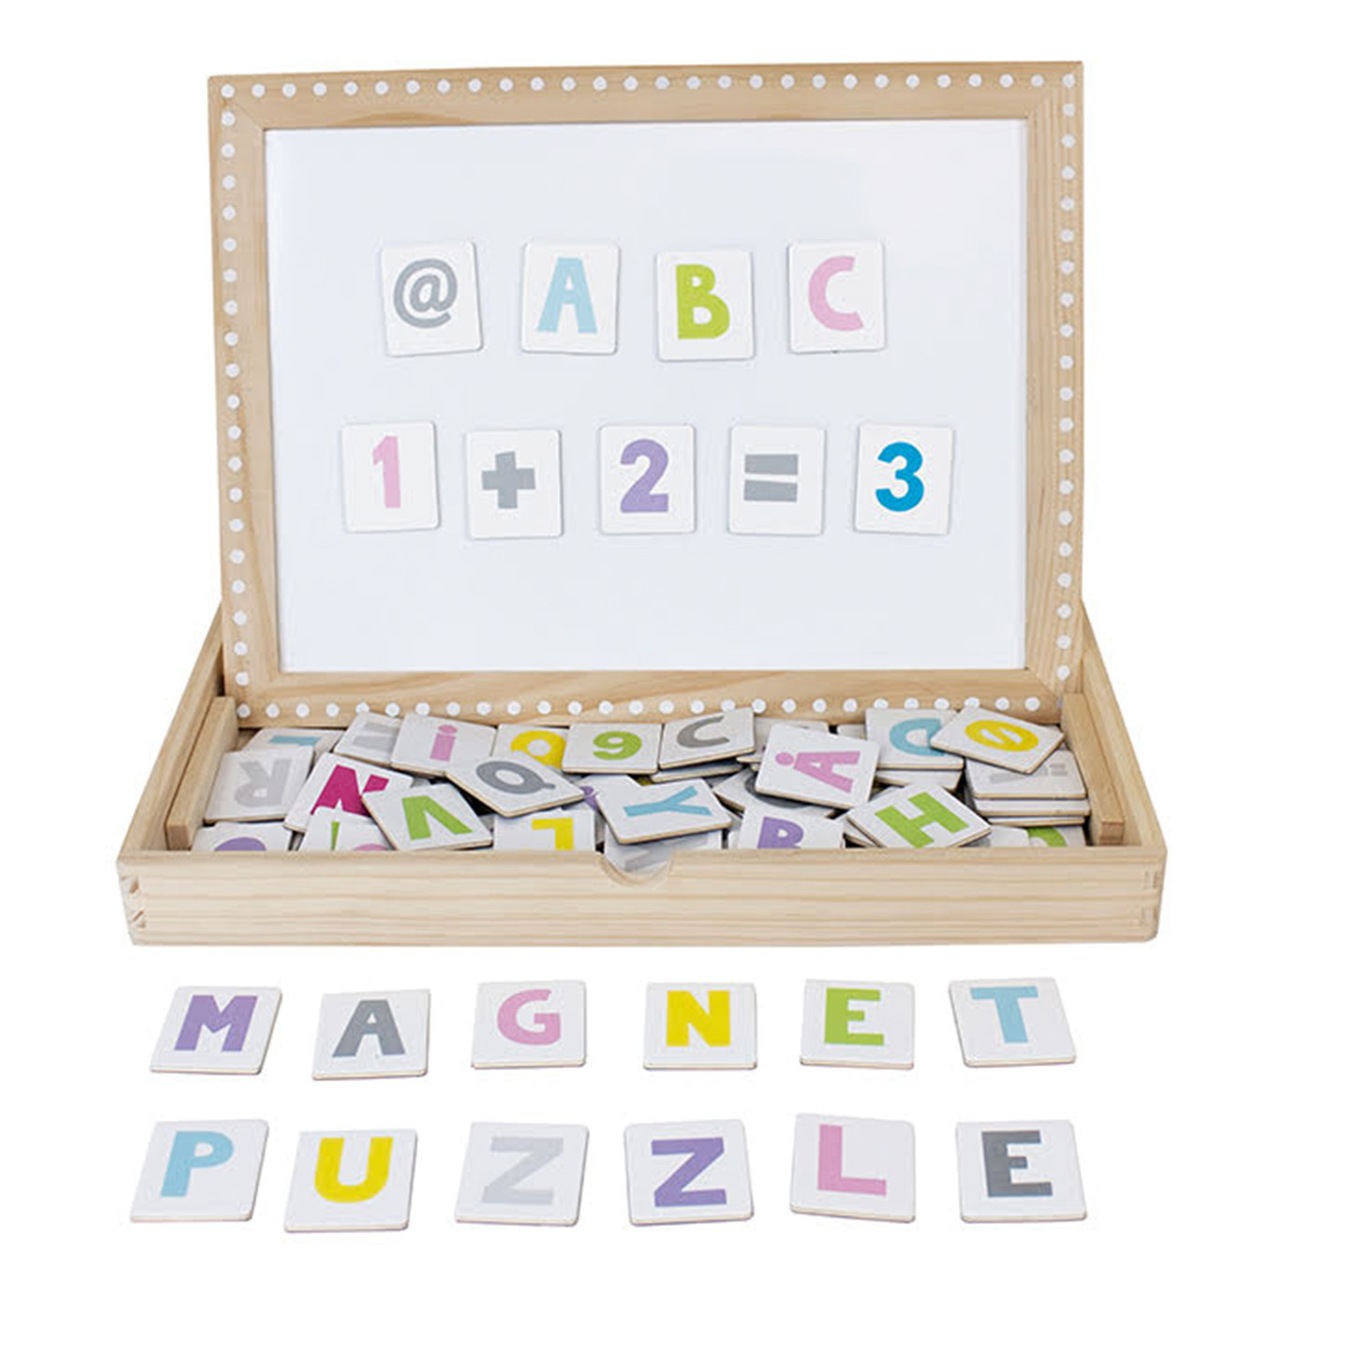 Magnetic Plate ABC